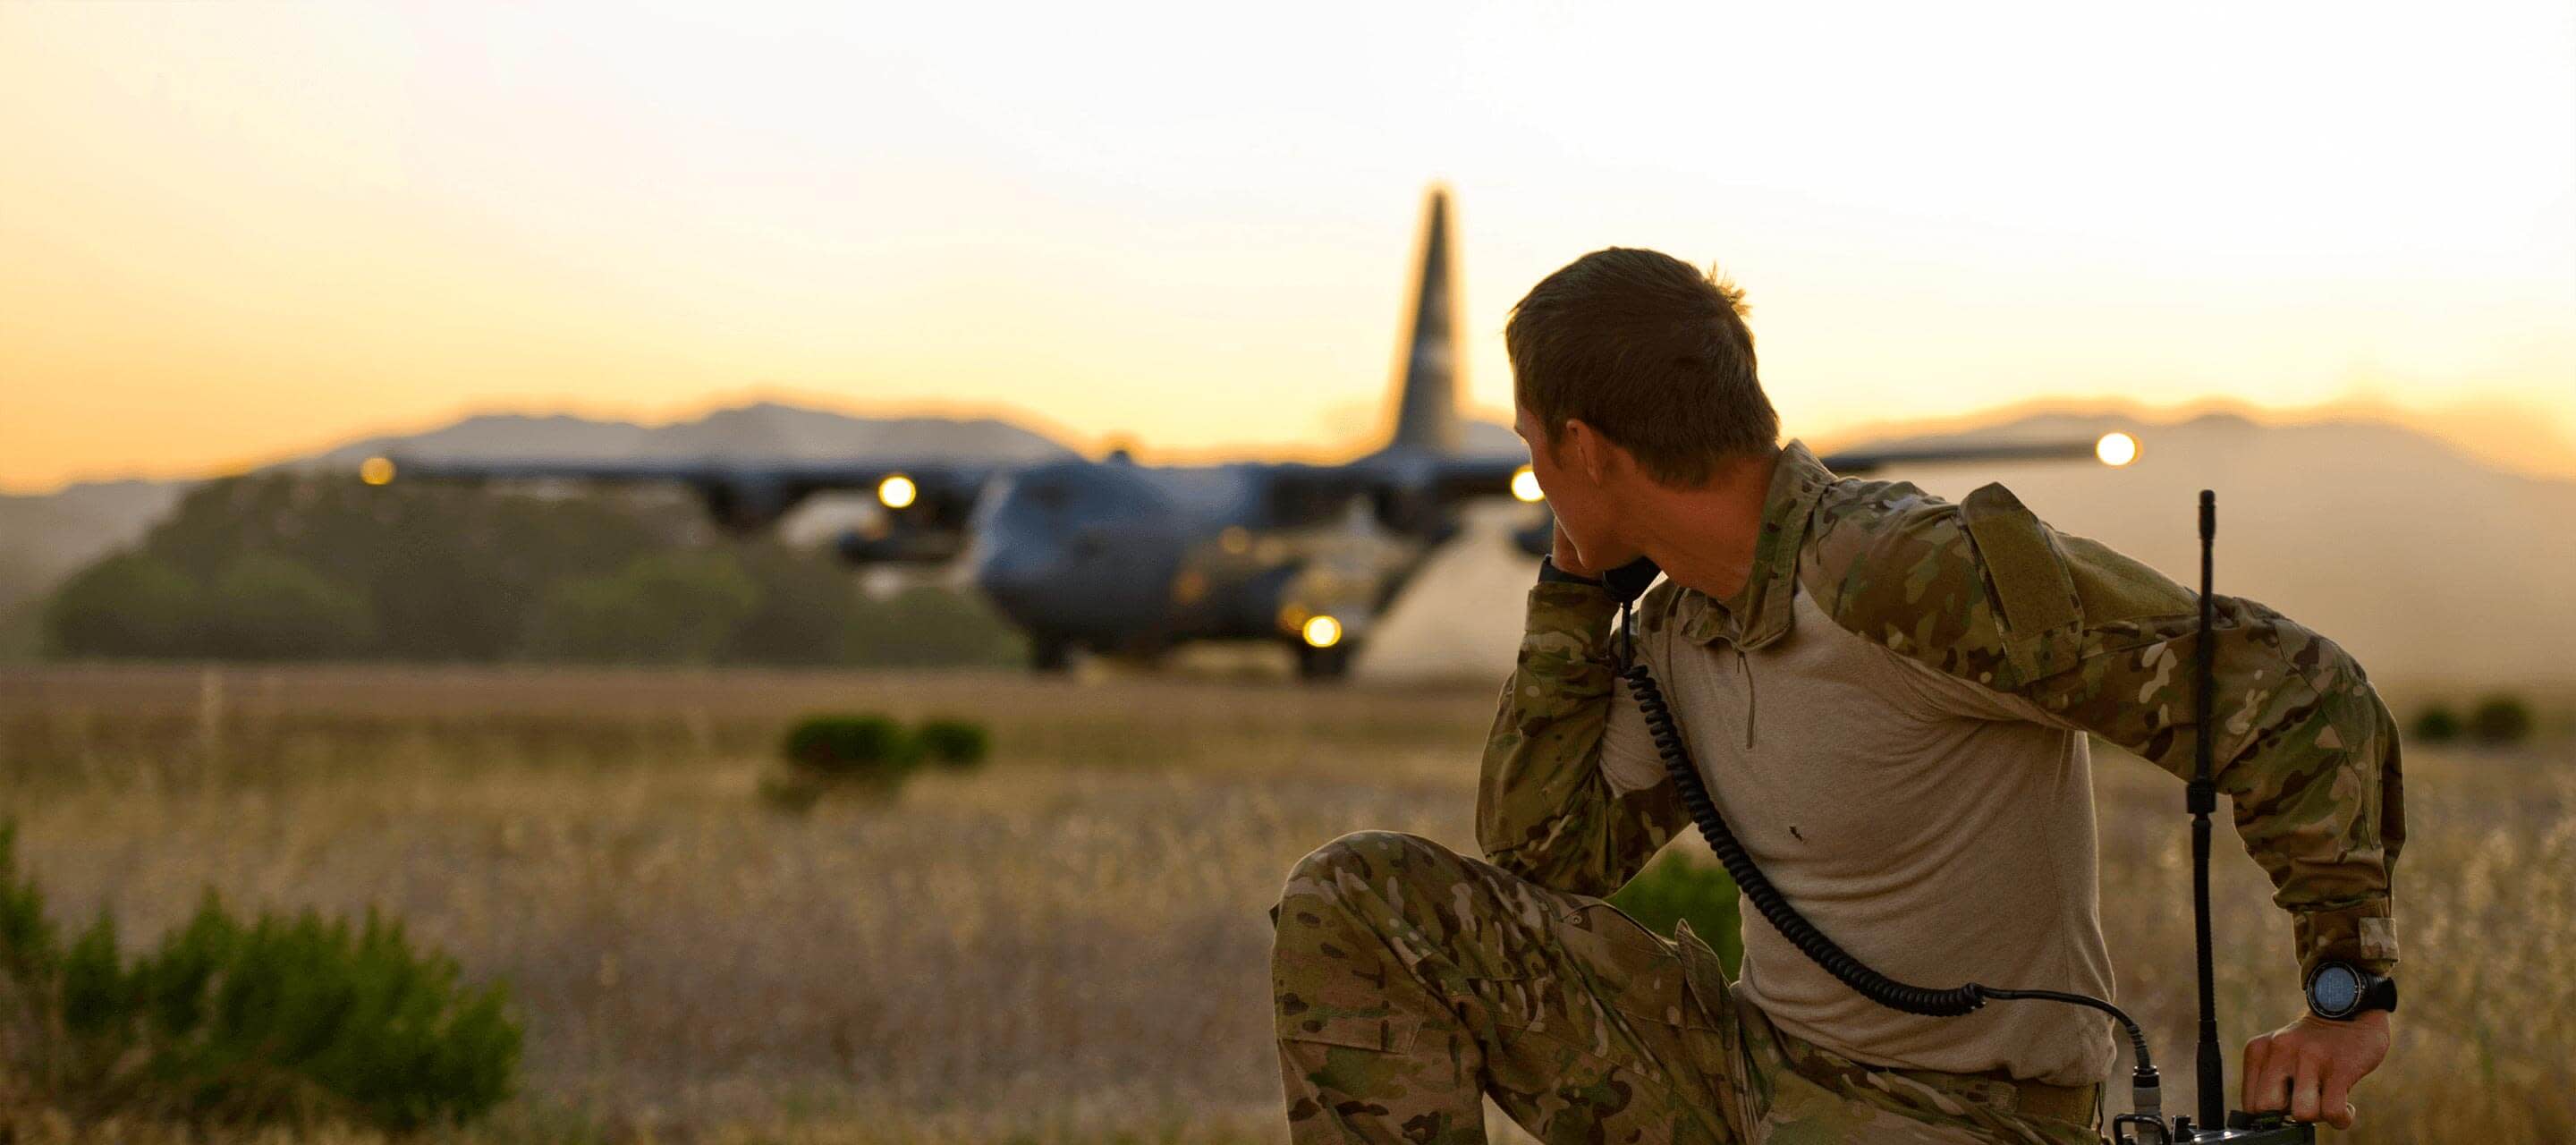 soldier looking at a plane 